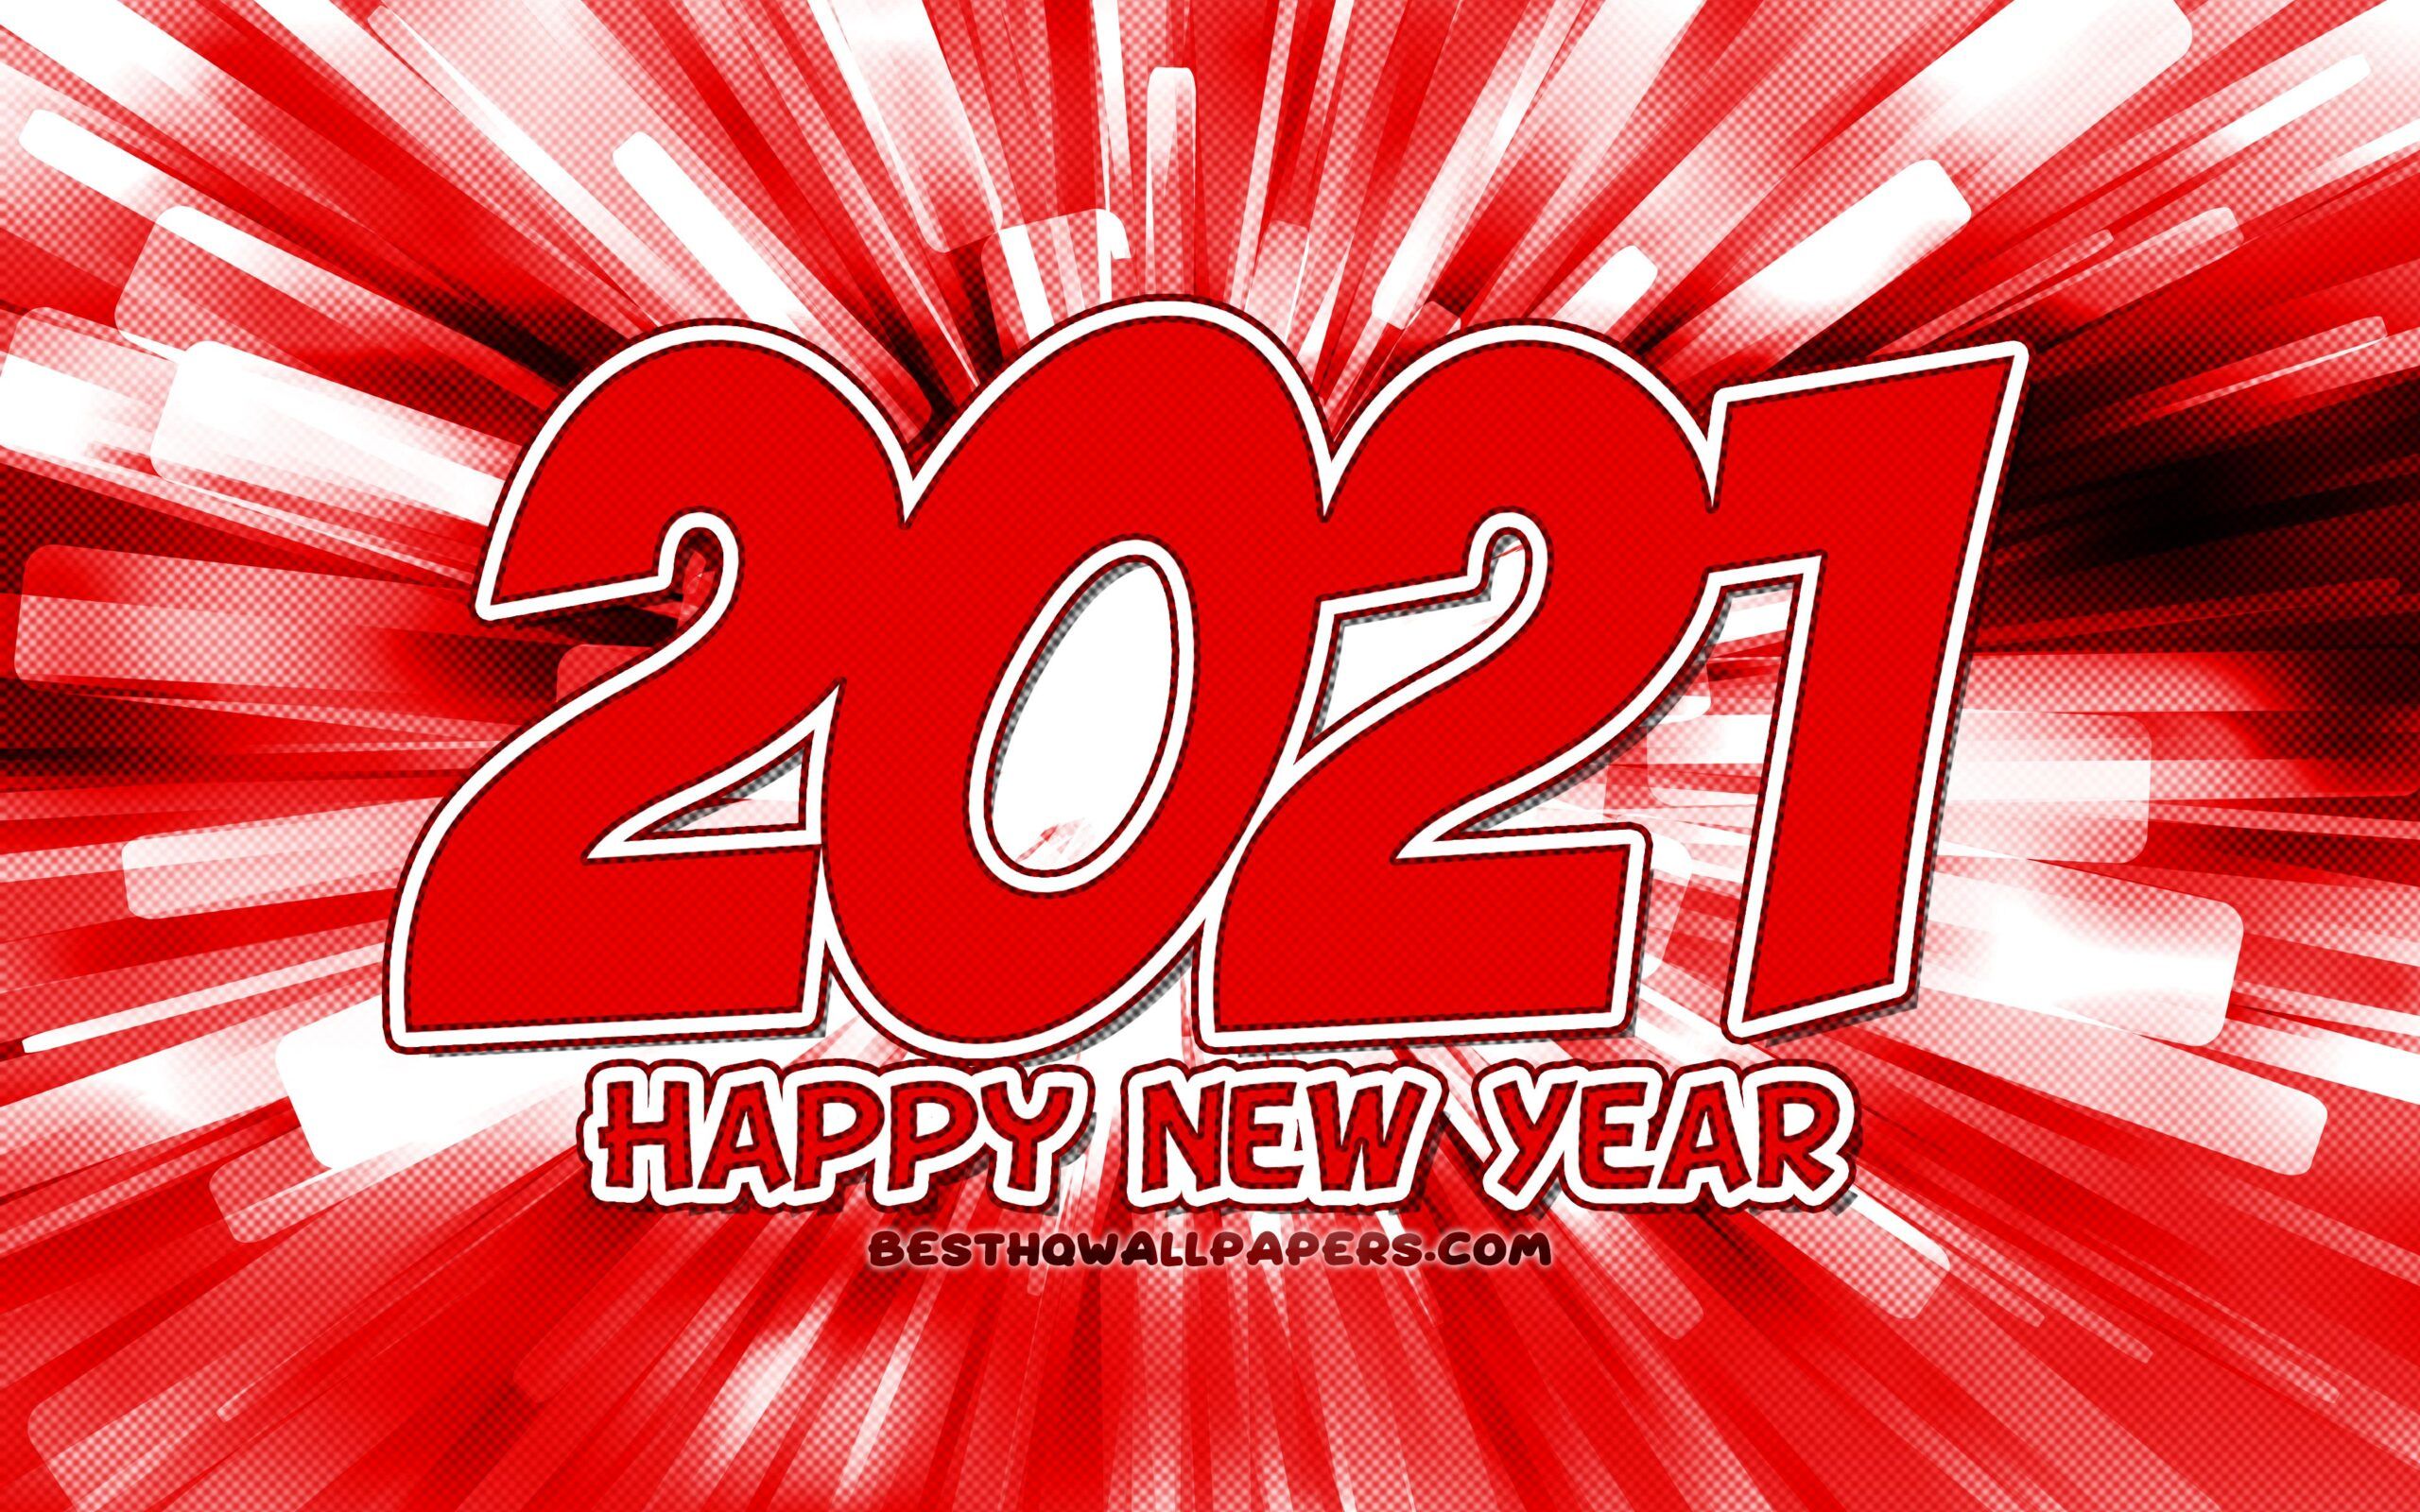 Top HD} Happy New Year 2021 Image >! Picture, Wallpaper Download